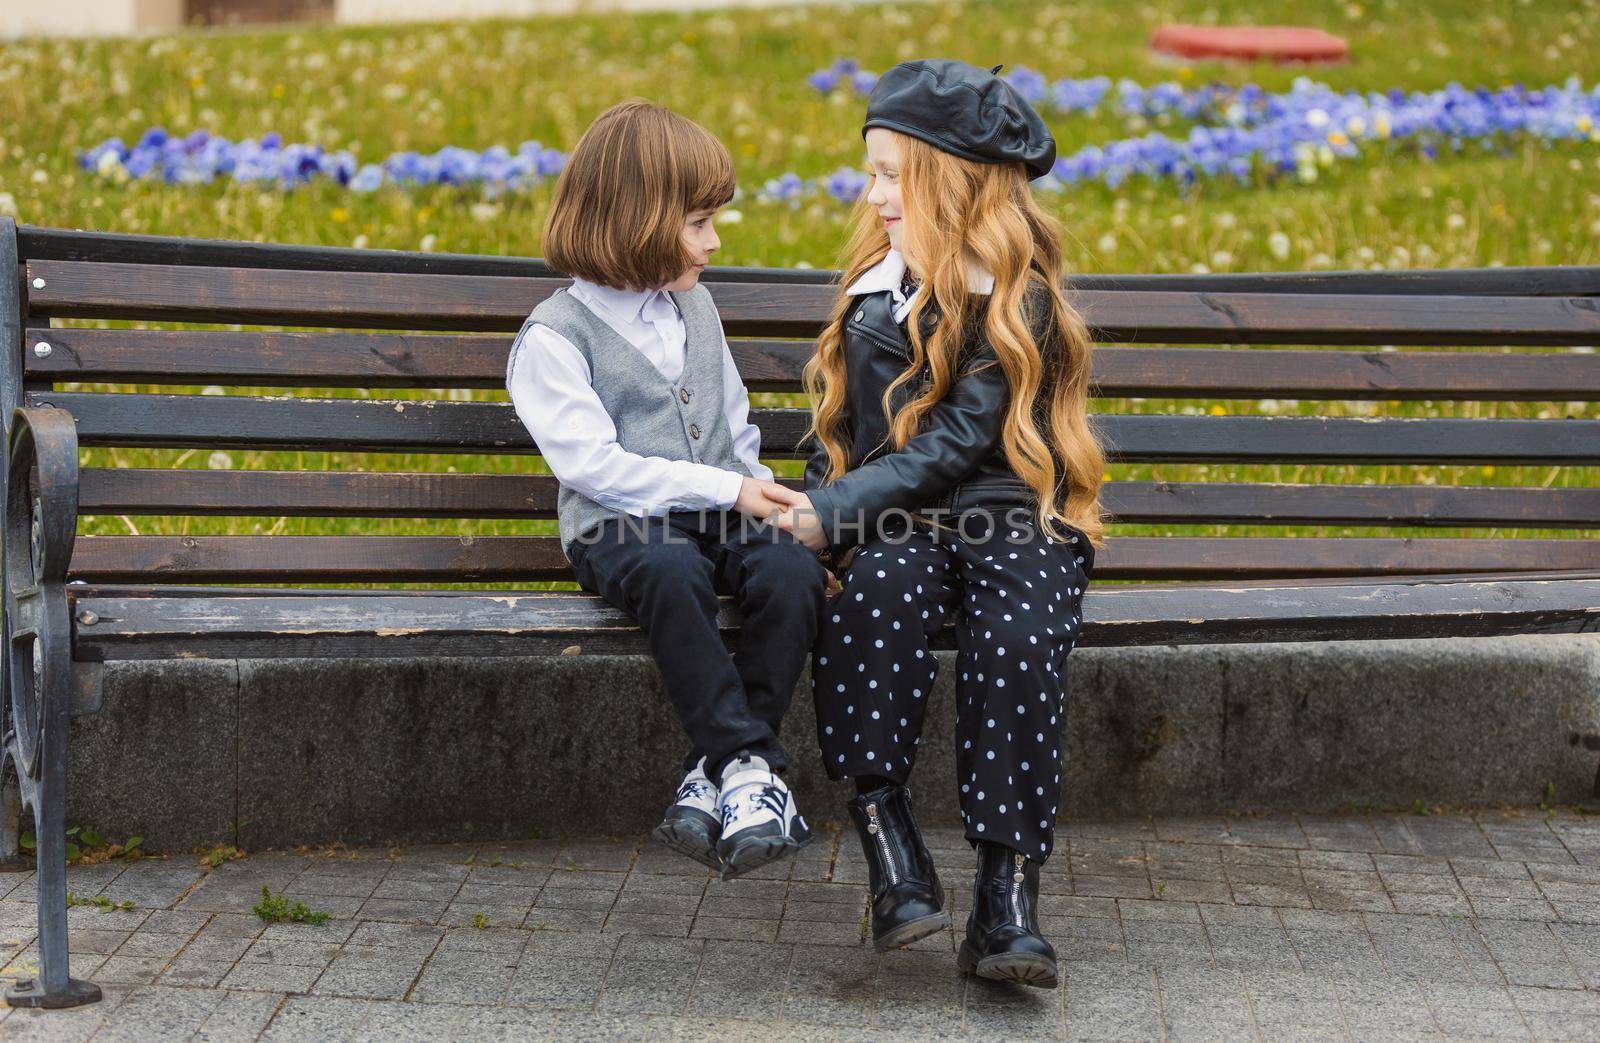 children sit on a bench and look at each other